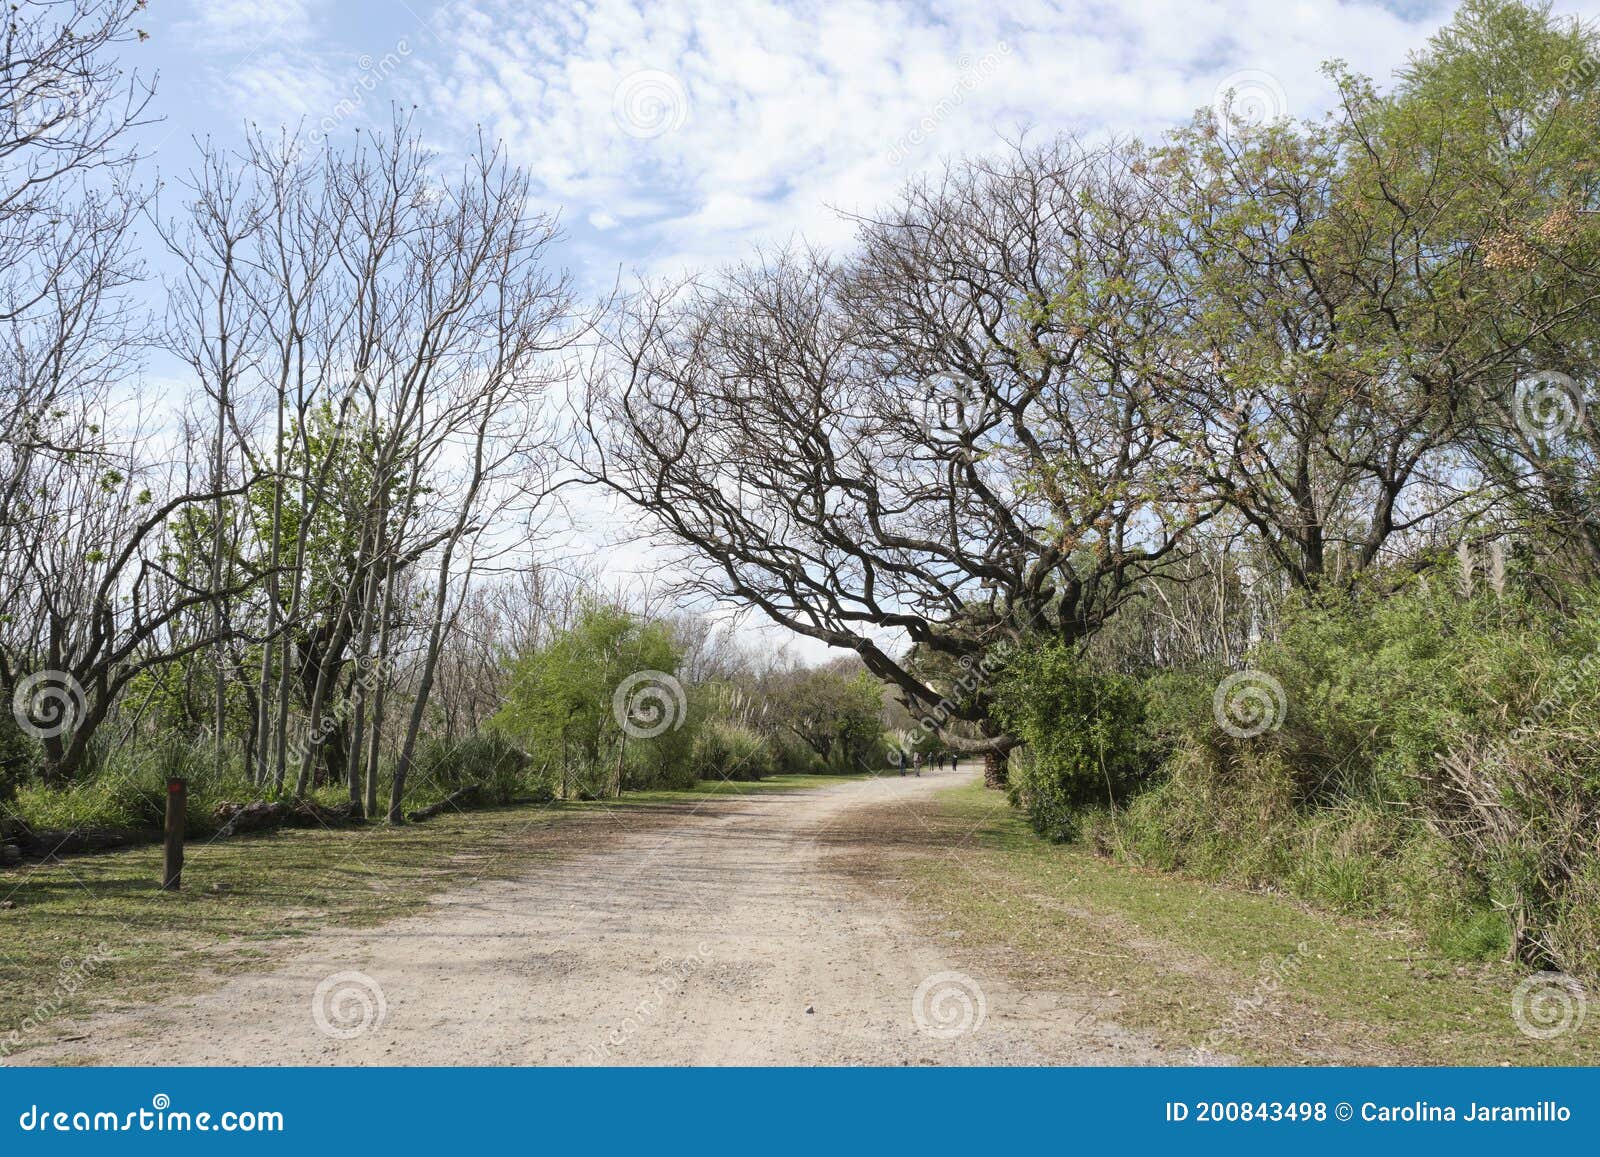 walking trail in the costanera sur ecological reserve, buenos aires, argentina